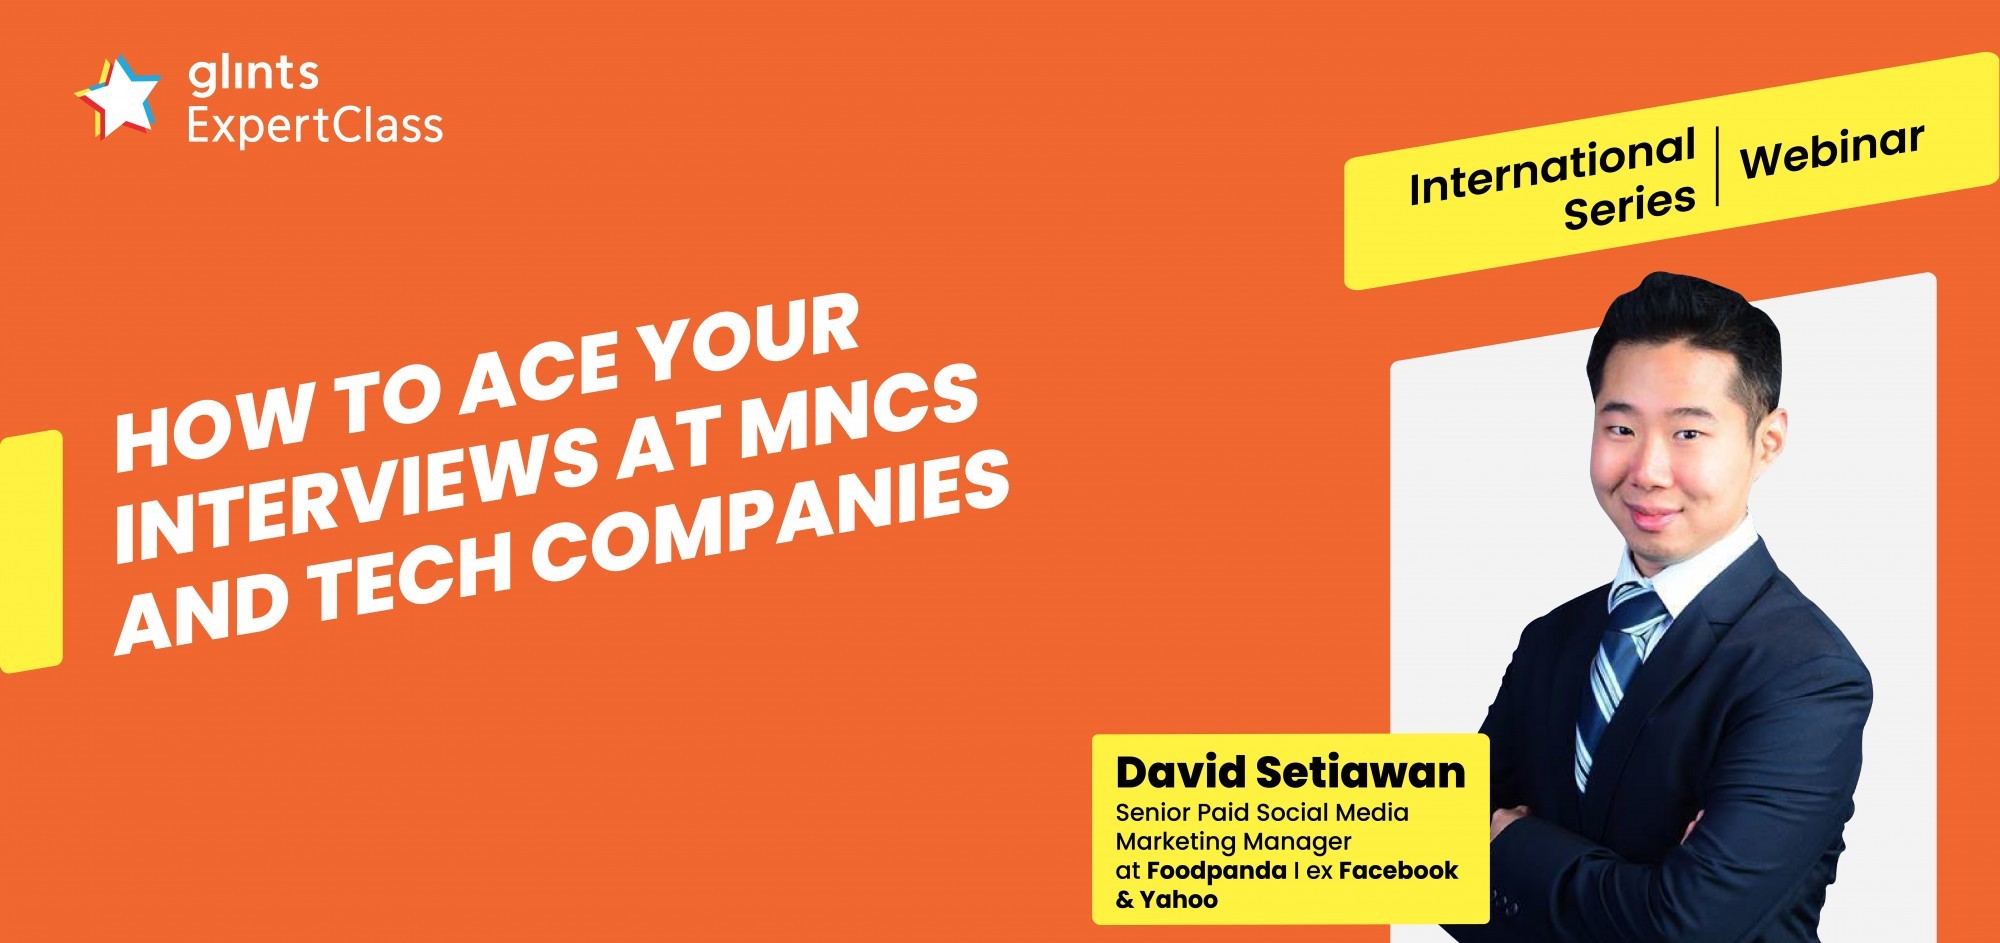 [Glints - GEC International Series] How to Ace your Interviews at MNCs and Tech Companies